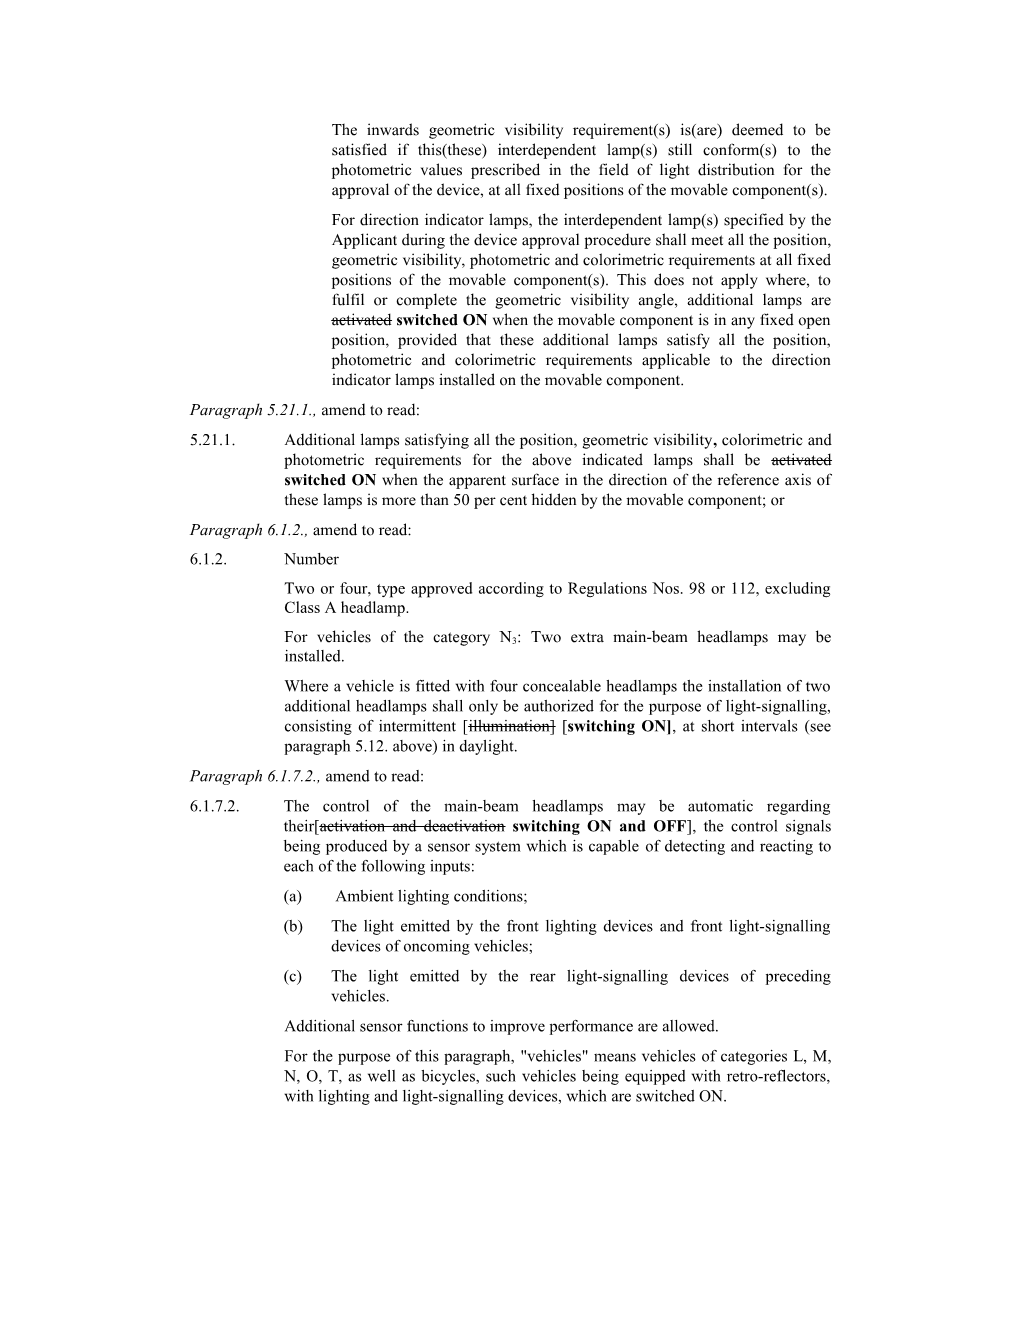 Proposal for Supplement 11 to the 06 Series of Amendments to Regulation No. 48 (Installation